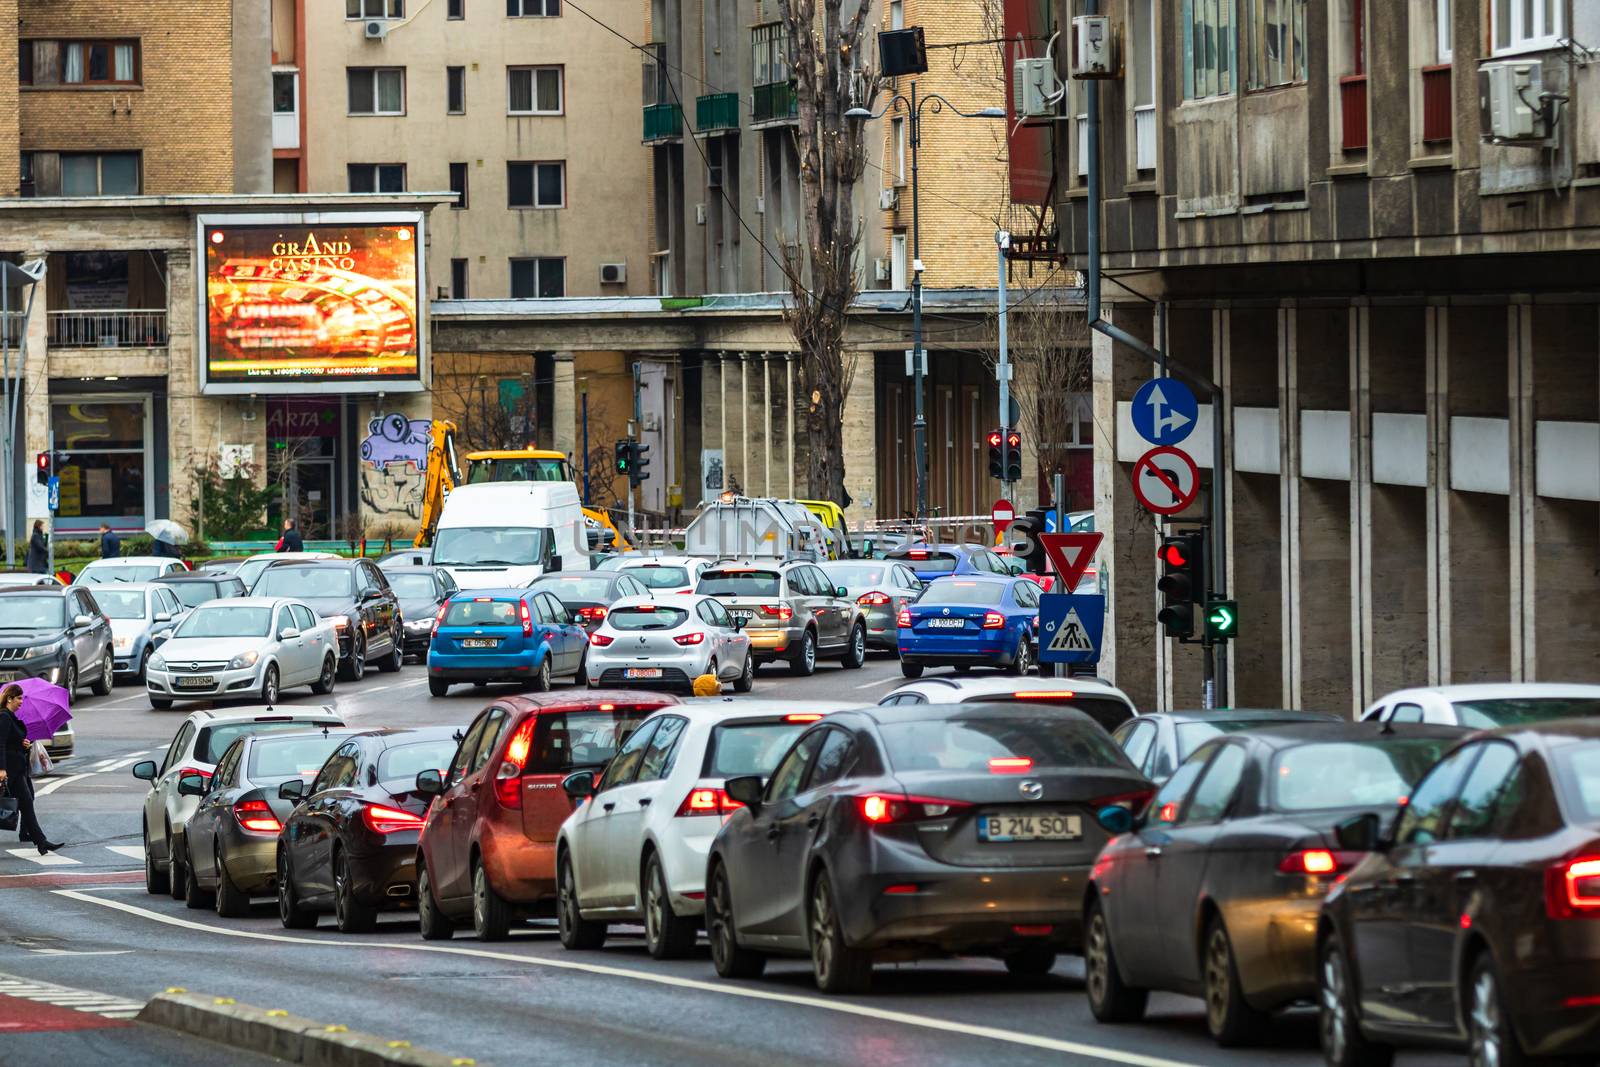 Car traffic at rush hour in downtown area of the city. Car pollution, traffic jam in the morning and evening in the capital city of Bucharest, Romania, 2020